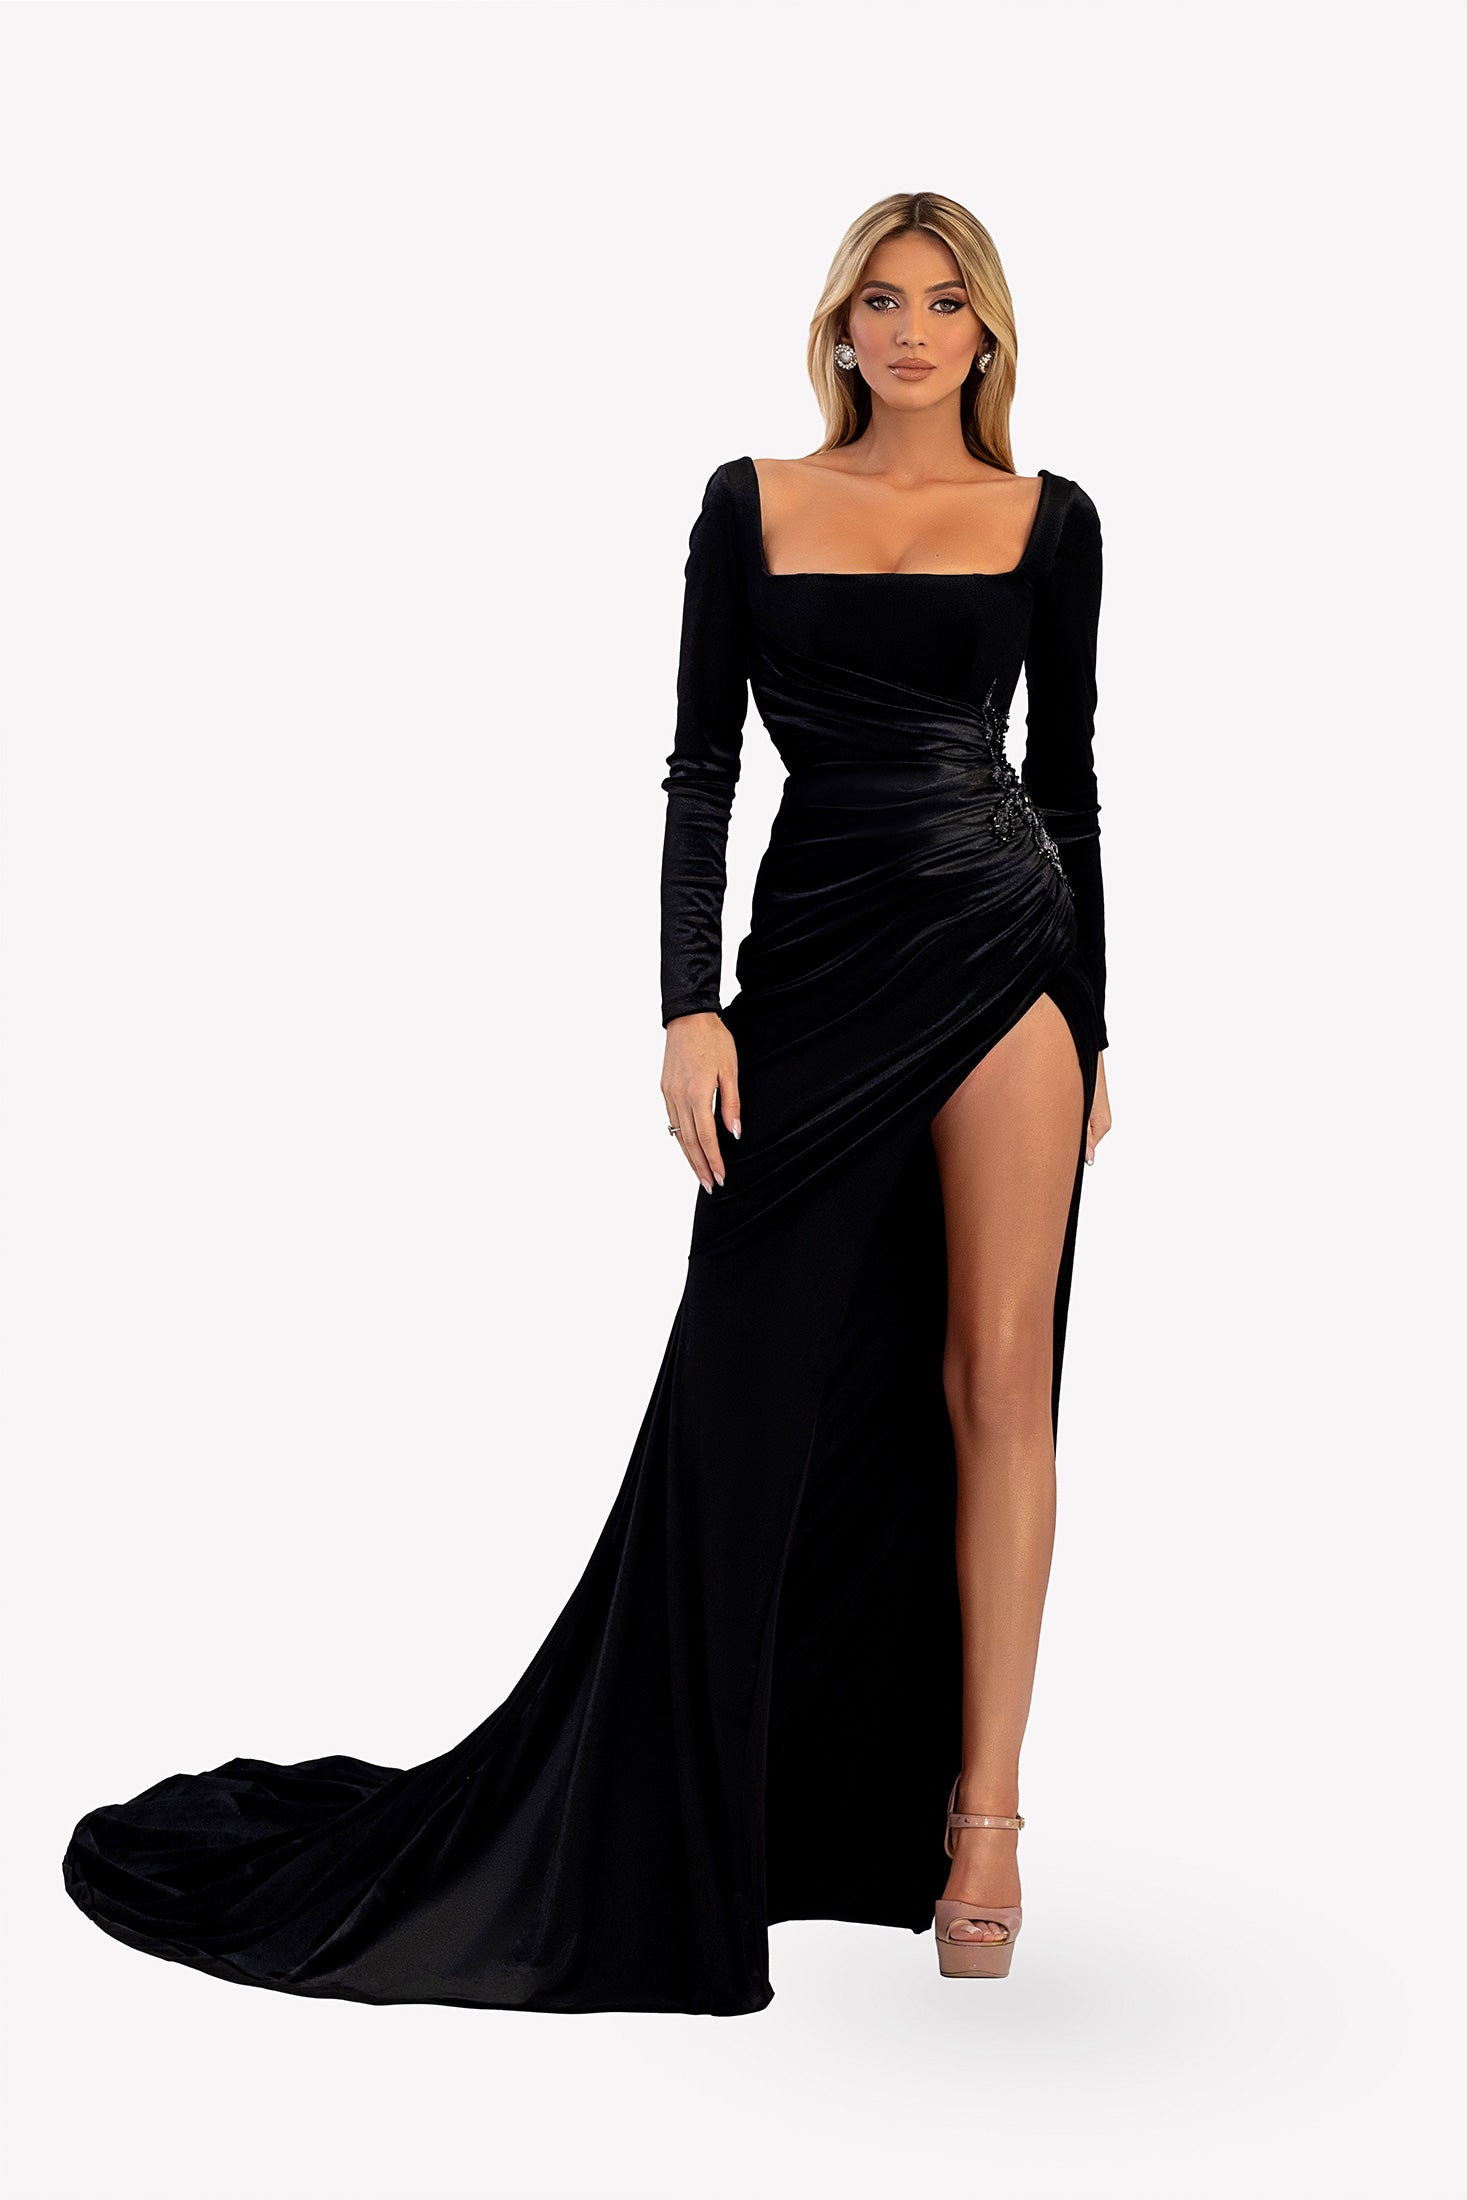 Buy ZABERRY Womens Wrap V Neck Long Sleeve Elegant Mermaid Ruched Velvet  Wedding Guest Cocktail Evening Party Maxi Dresses, Black, Small at Amazon.in